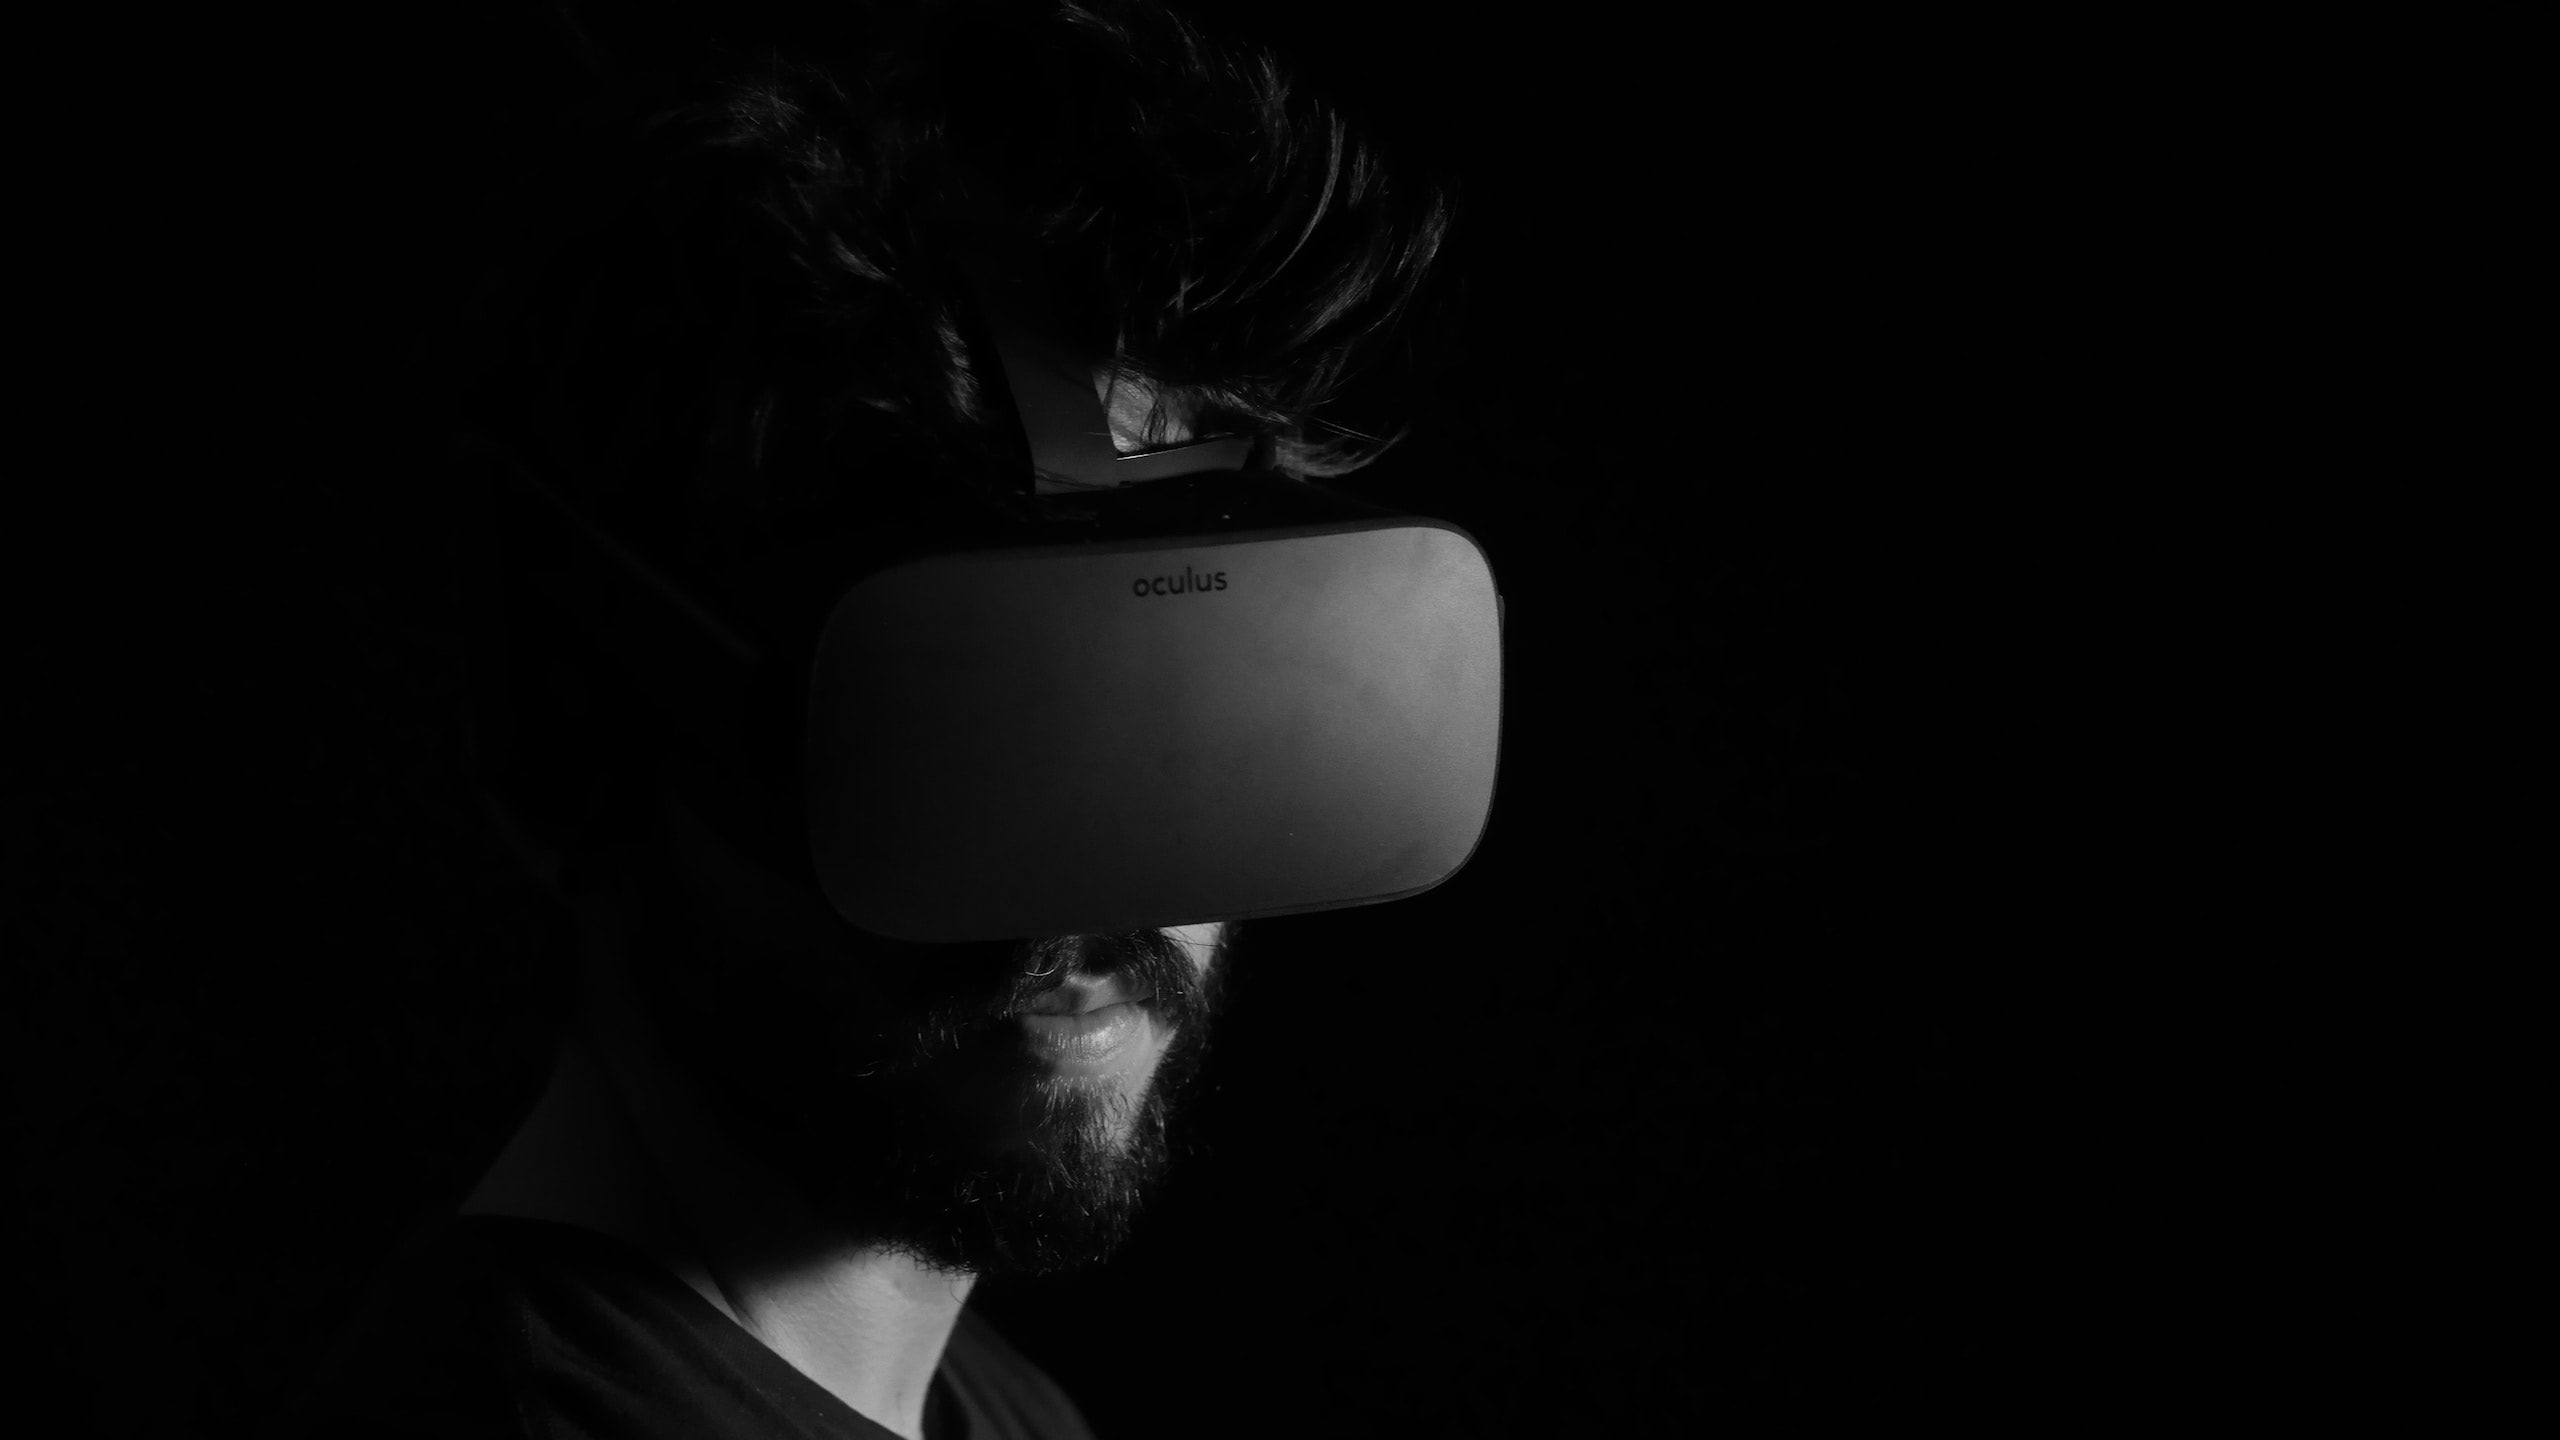 Person wearing a VR headset, their face is obscured by shadows